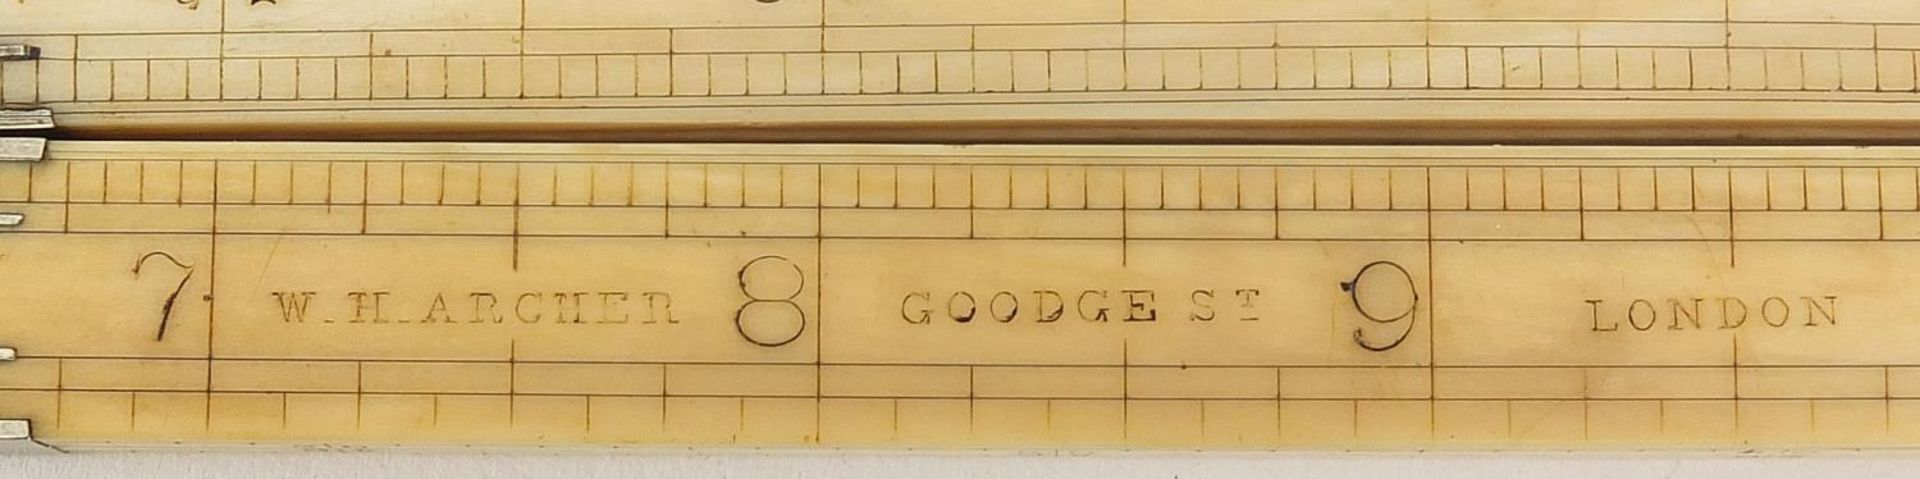 19th century ivory folding rule by W H Archer of Goodge St London, 16cm in length when closed - Image 3 of 3